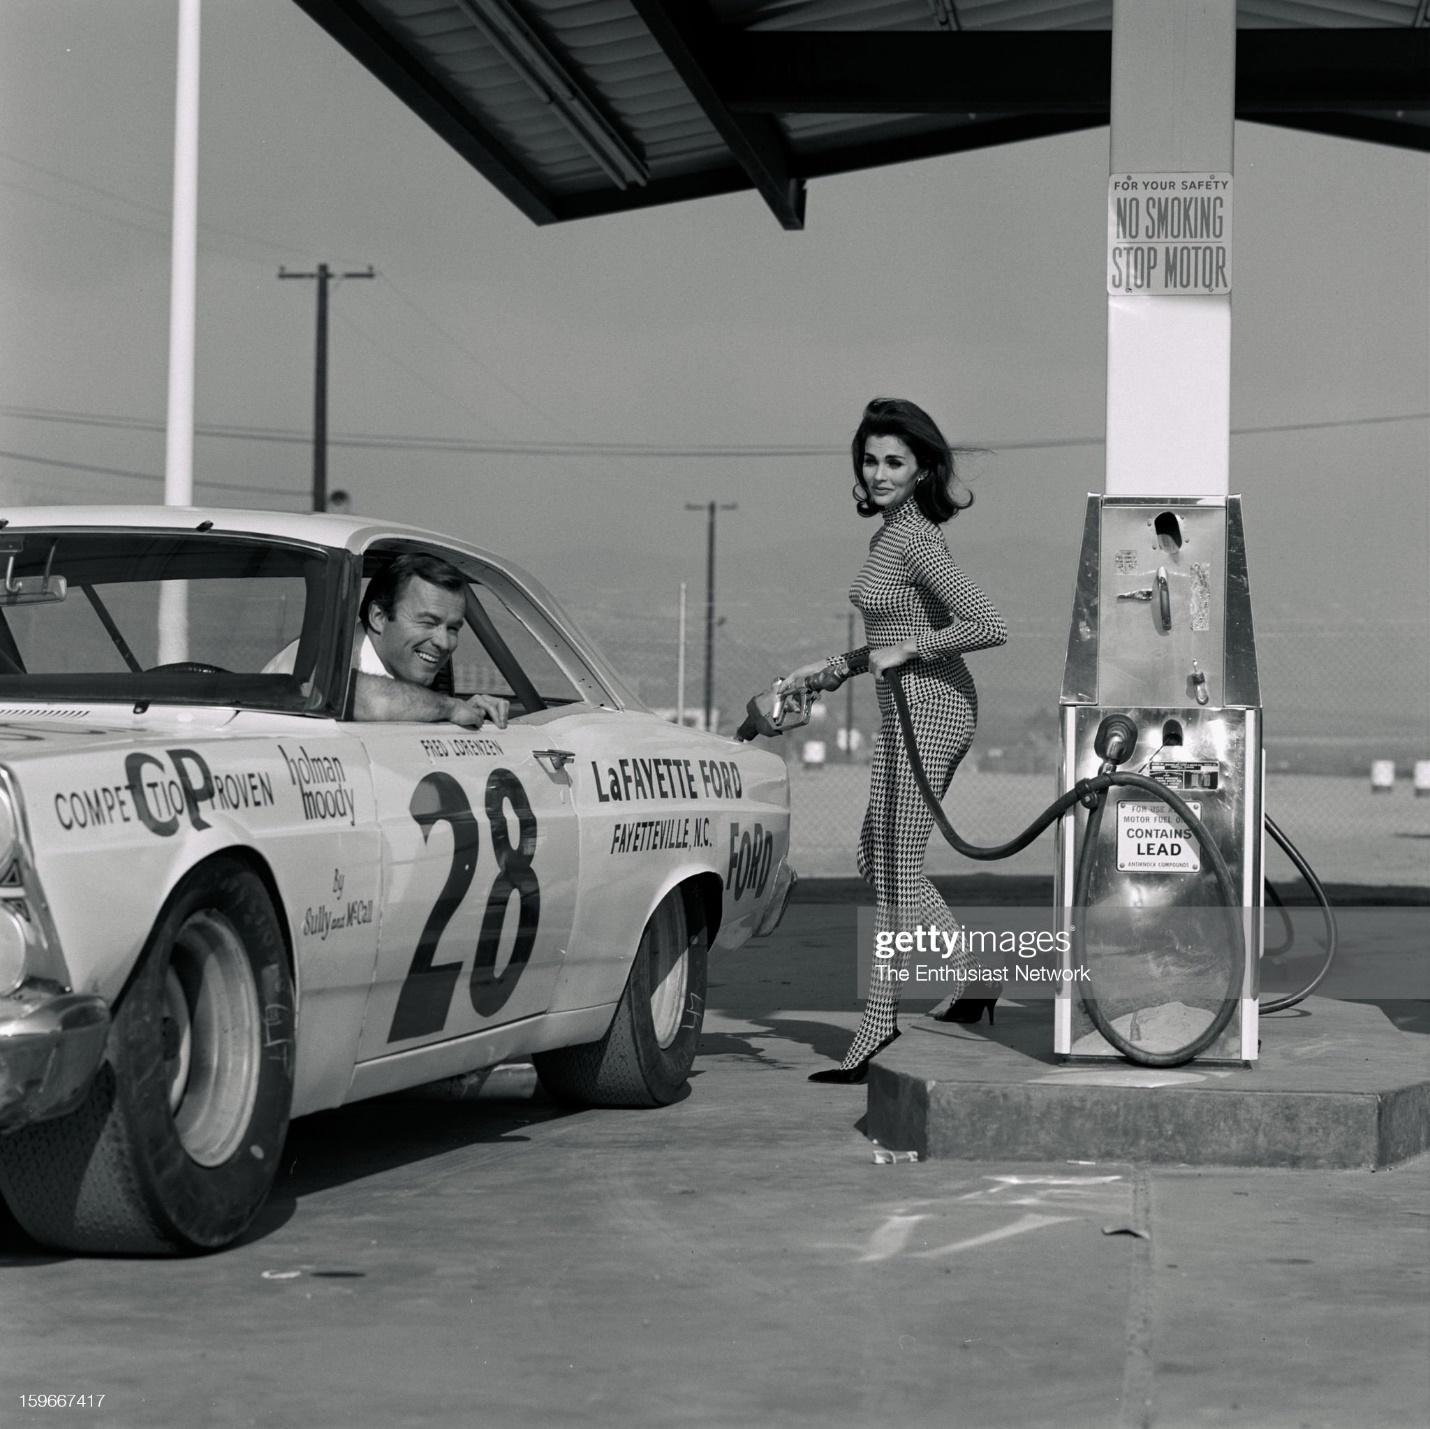 D:\Documenti\posts\posts\Women and motorsport\foto\Getty e altre\queen-motor-trend-500-fred-lorenzen-dick-hutcherson-race-queen-and-picture-id159667417.jpg